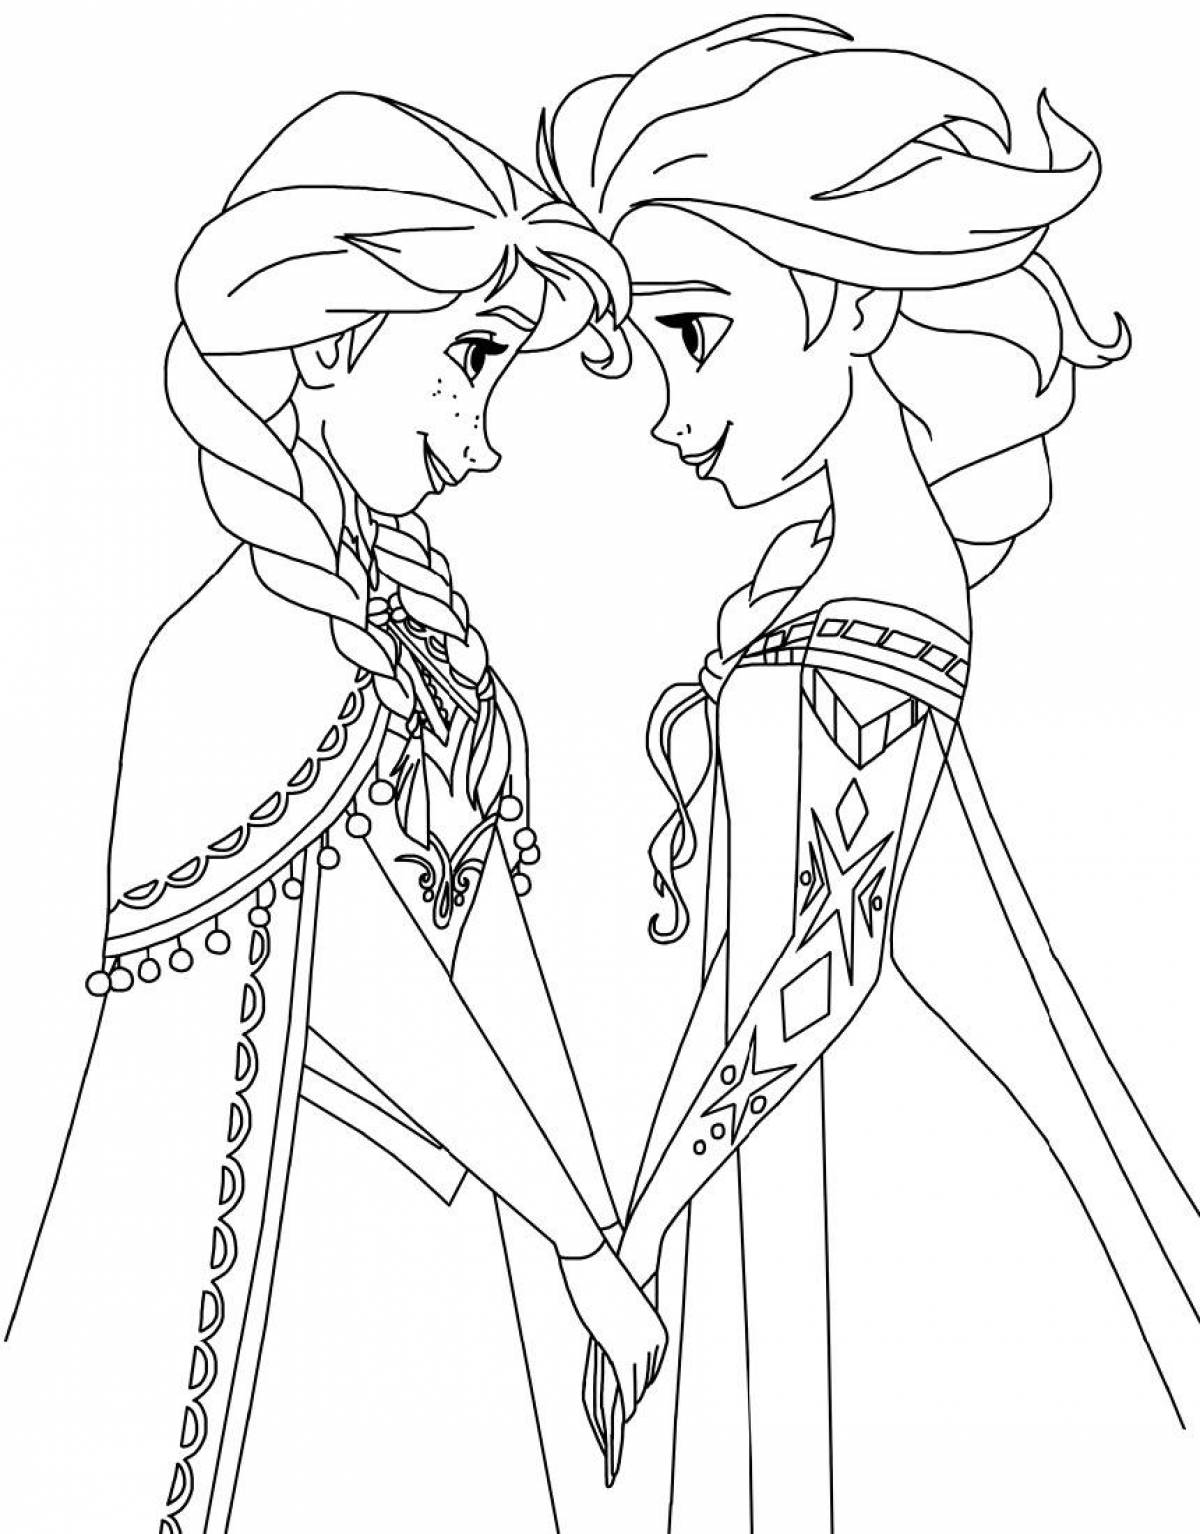 Elsa and anna radiant coloring book for kids